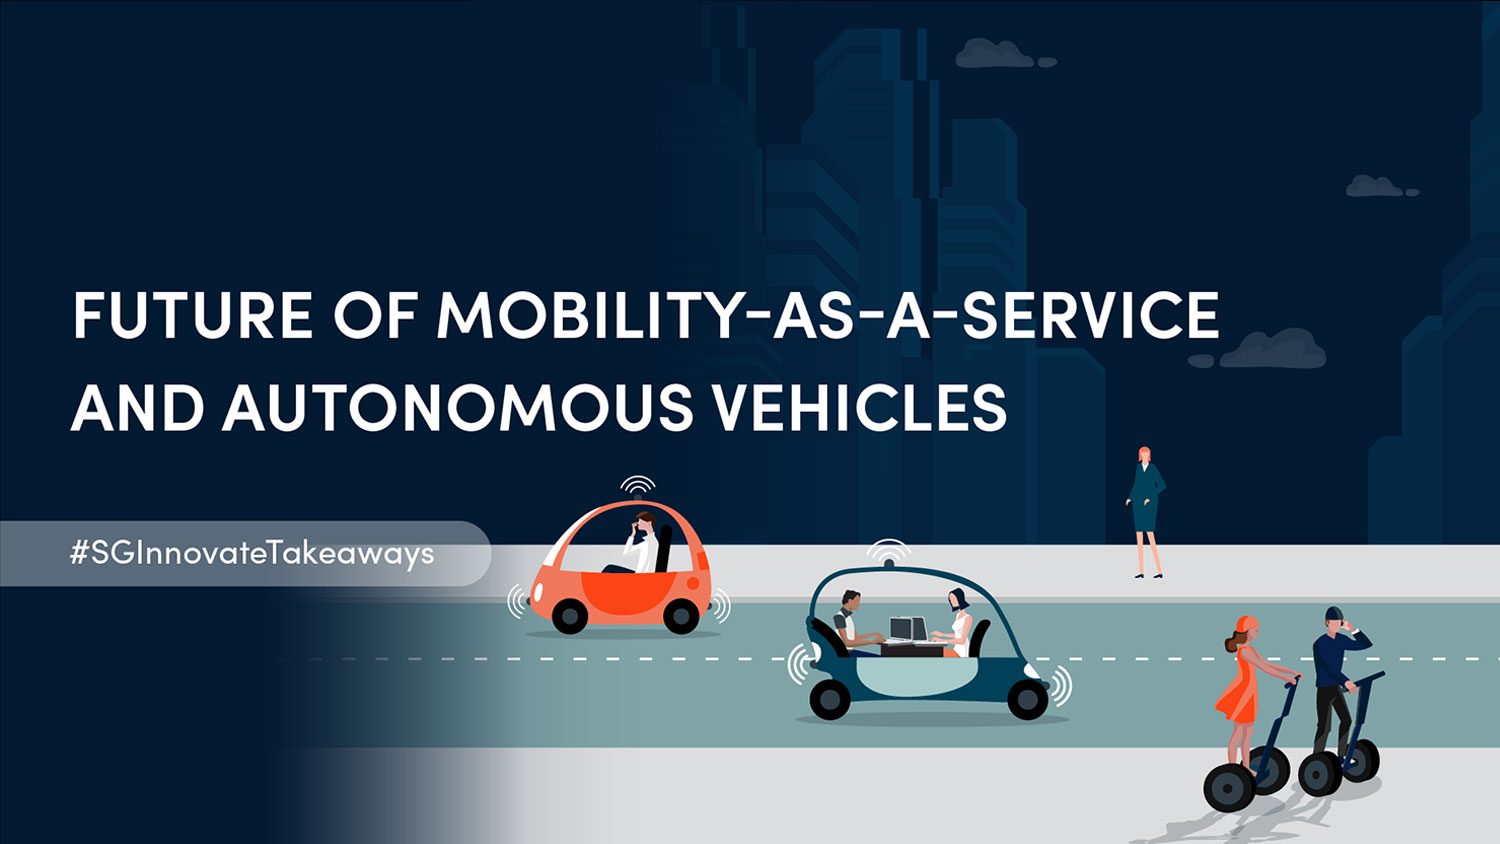 Future of Mobility-as-a-Service and Autonomous Vehicles